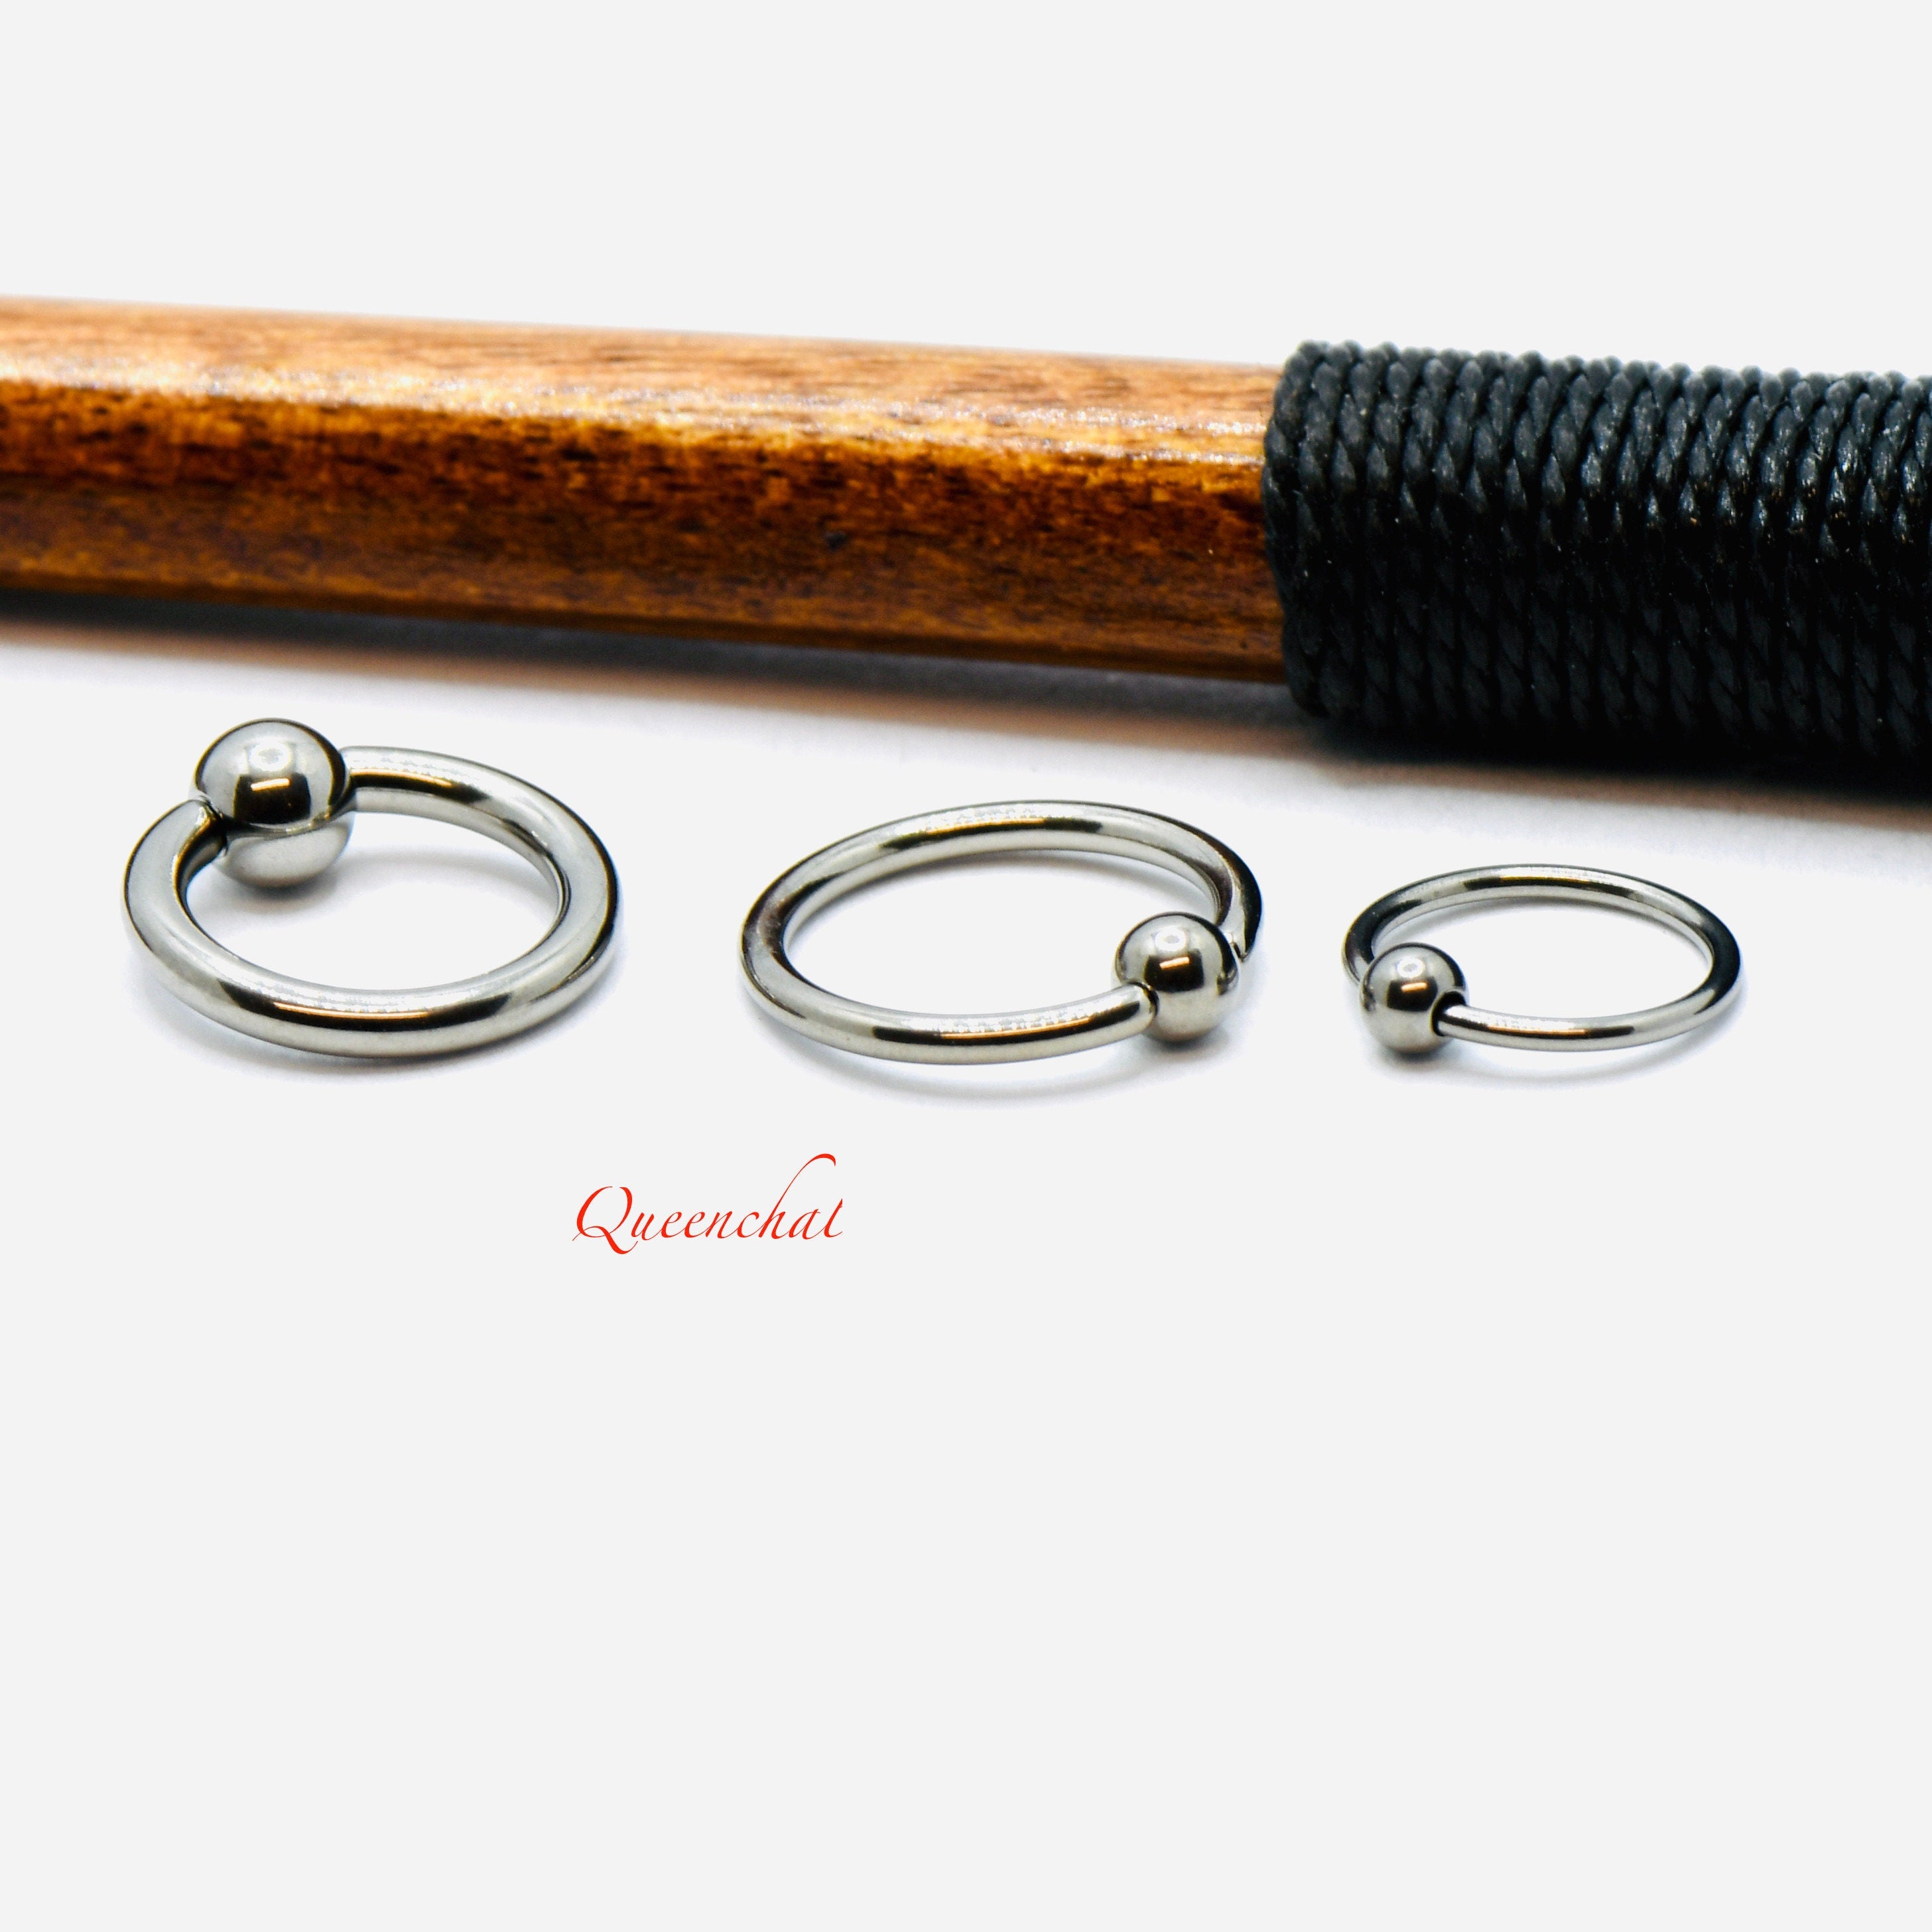 Captive Bead Rings – Queenchal Jewellery